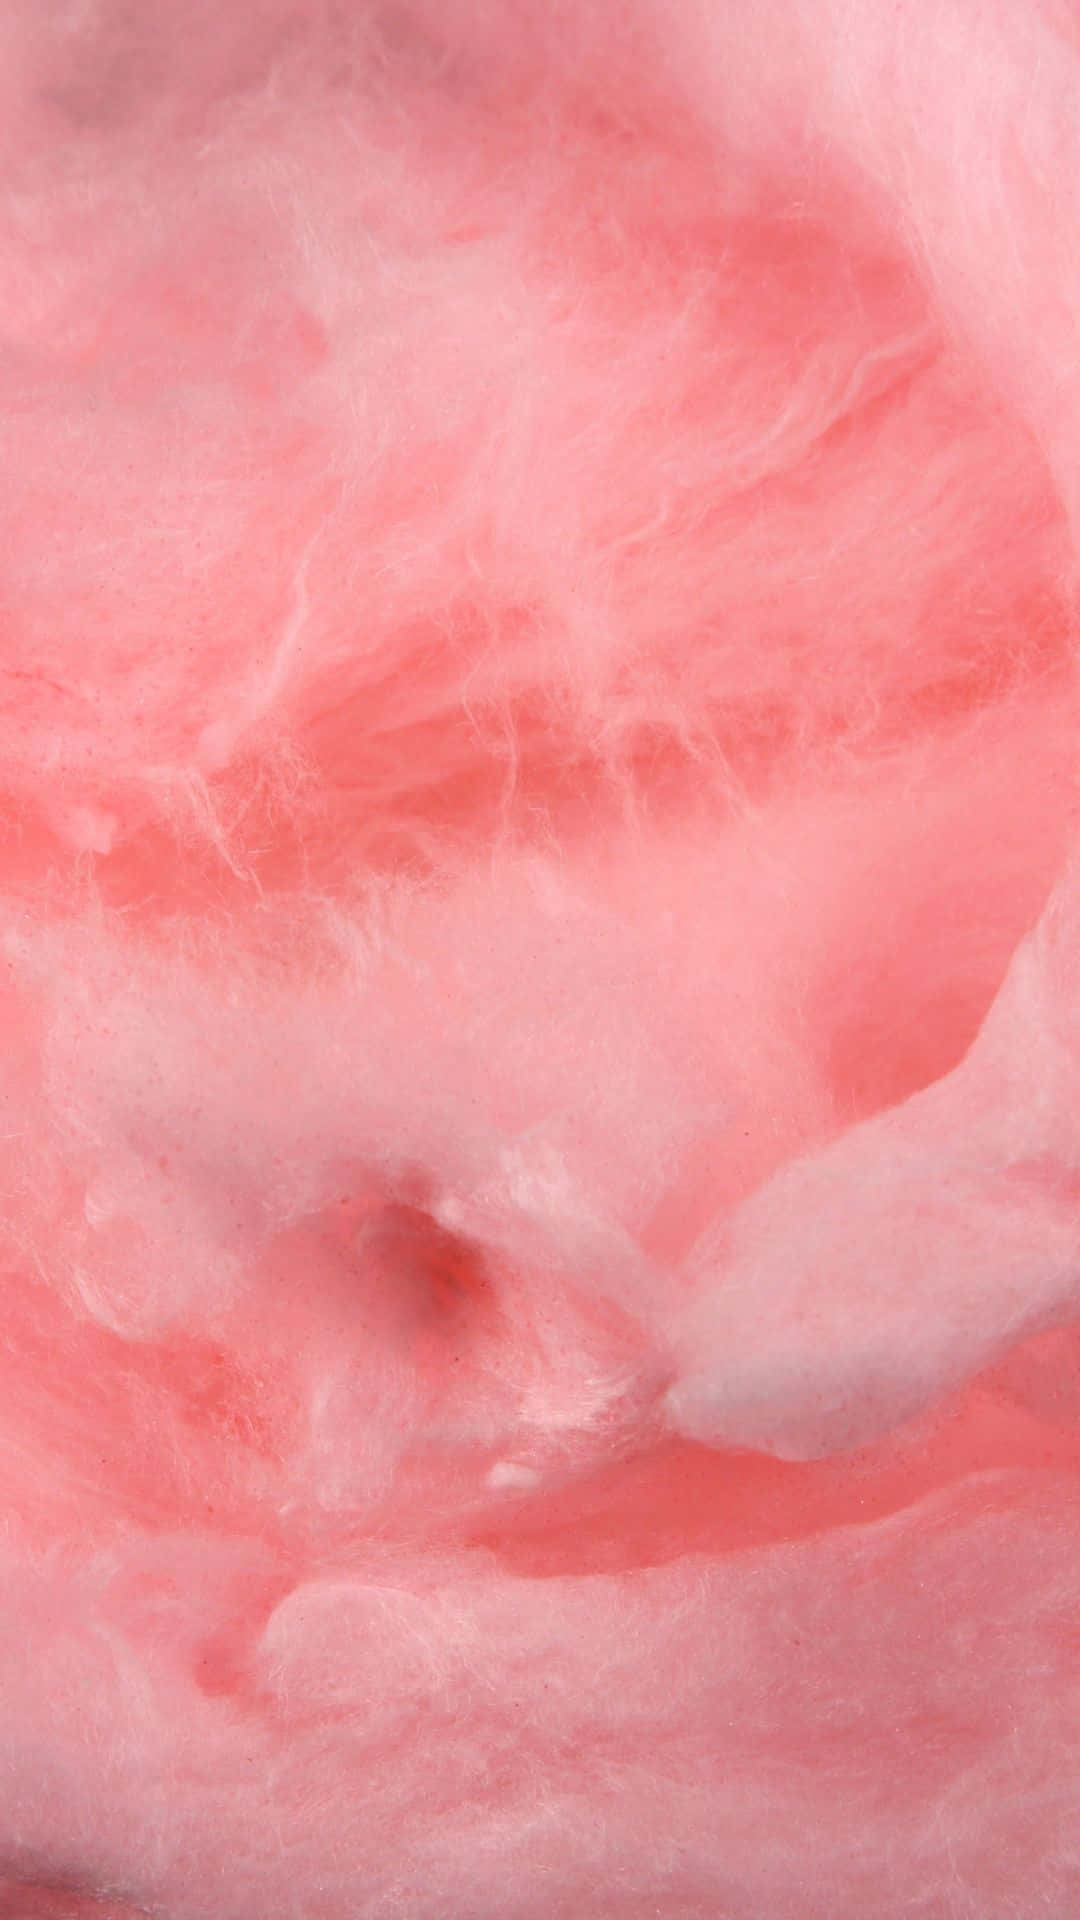 Delicious Fluffy Cotton Candy on a Stick Wallpaper